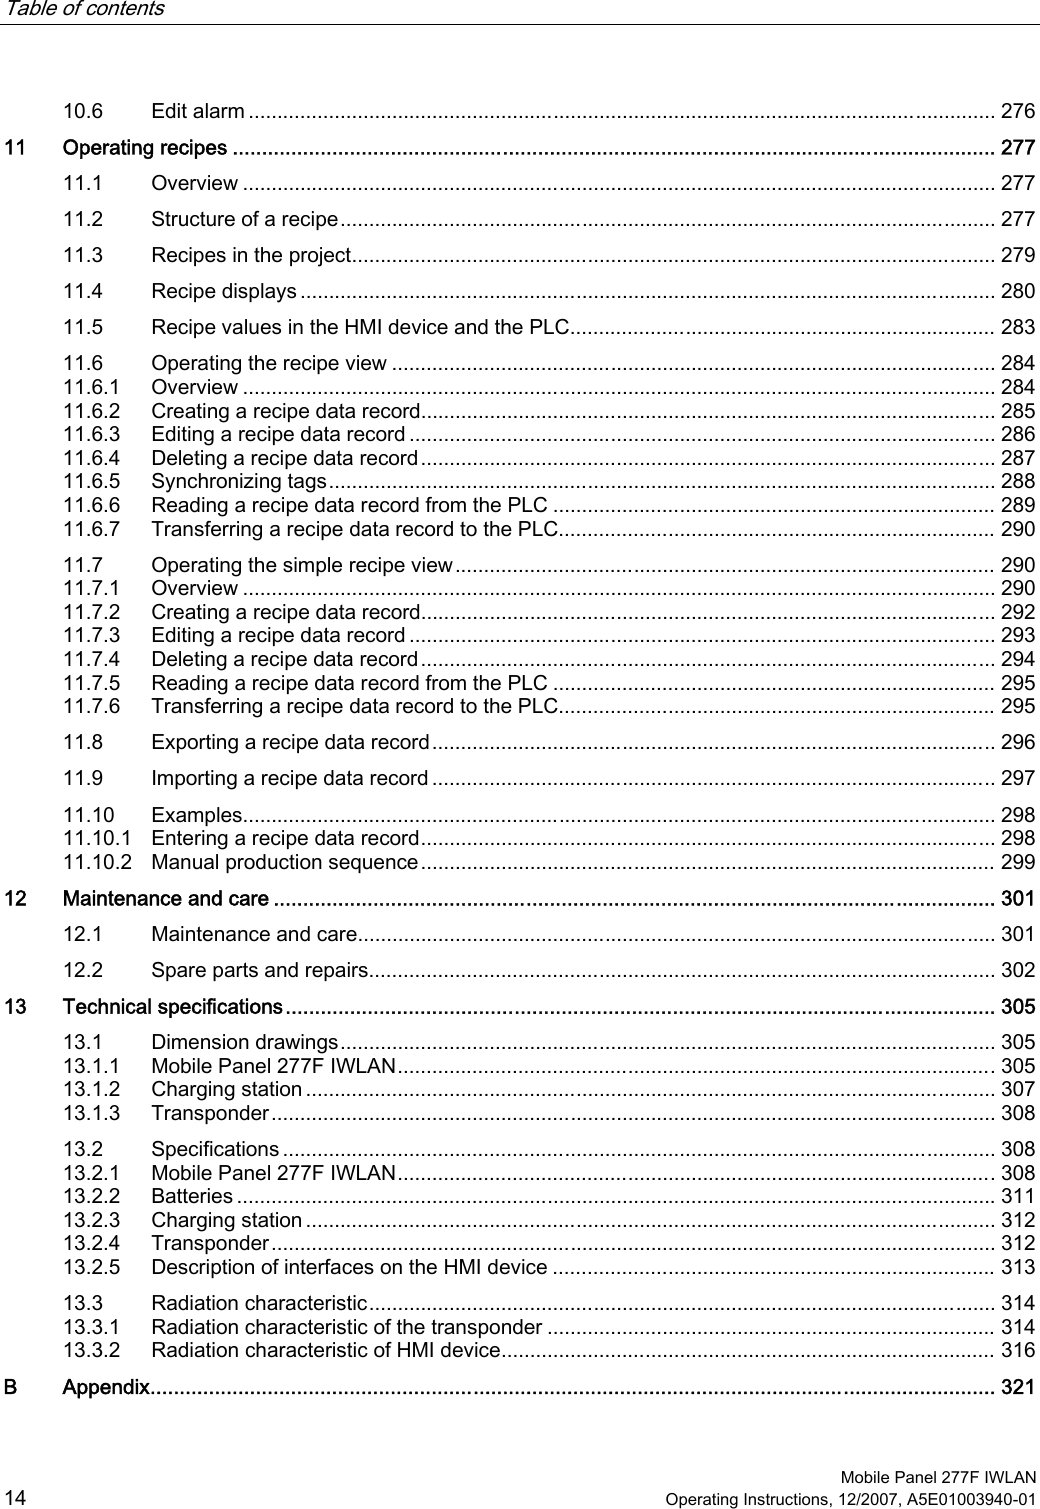 Table of contents      Mobile Panel 277F IWLAN 14 Operating Instructions, 12/2007, A5E01003940-01 10.6  Edit alarm .................................................................................................................................. 276 11  Operating recipes .................................................................................................................................. 277 11.1  Overview ................................................................................................................................... 277 11.2  Structure of a recipe.................................................................................................................. 277 11.3  Recipes in the project................................................................................................................ 279 11.4  Recipe displays ......................................................................................................................... 280 11.5  Recipe values in the HMI device and the PLC.......................................................................... 283 11.6  Operating the recipe view ......................................................................................................... 284 11.6.1  Overview ................................................................................................................................... 284 11.6.2  Creating a recipe data record.................................................................................................... 285 11.6.3  Editing a recipe data record ...................................................................................................... 286 11.6.4  Deleting a recipe data record.................................................................................................... 287 11.6.5  Synchronizing tags.................................................................................................................... 288 11.6.6  Reading a recipe data record from the PLC ............................................................................. 289 11.6.7  Transferring a recipe data record to the PLC............................................................................ 290 11.7  Operating the simple recipe view.............................................................................................. 290 11.7.1  Overview ................................................................................................................................... 290 11.7.2  Creating a recipe data record.................................................................................................... 292 11.7.3  Editing a recipe data record ...................................................................................................... 293 11.7.4  Deleting a recipe data record.................................................................................................... 294 11.7.5  Reading a recipe data record from the PLC ............................................................................. 295 11.7.6  Transferring a recipe data record to the PLC............................................................................ 295 11.8  Exporting a recipe data record.................................................................................................. 296 11.9  Importing a recipe data record .................................................................................................. 297 11.10  Examples................................................................................................................................... 298 11.10.1  Entering a recipe data record.................................................................................................... 298 11.10.2  Manual production sequence.................................................................................................... 299 12  Maintenance and care ........................................................................................................................... 301 12.1  Maintenance and care............................................................................................................... 301 12.2  Spare parts and repairs............................................................................................................. 302 13  Technical specifications......................................................................................................................... 305 13.1  Dimension drawings.................................................................................................................. 305 13.1.1  Mobile Panel 277F IWLAN........................................................................................................305 13.1.2  Charging station ........................................................................................................................ 307 13.1.3  Transponder.............................................................................................................................. 308 13.2  Specifications ............................................................................................................................ 308 13.2.1  Mobile Panel 277F IWLAN........................................................................................................308 13.2.2  Batteries .................................................................................................................................... 311 13.2.3  Charging station ........................................................................................................................ 312 13.2.4  Transponder.............................................................................................................................. 312 13.2.5  Description of interfaces on the HMI device ............................................................................. 313 13.3  Radiation characteristic............................................................................................................. 314 13.3.1  Radiation characteristic of the transponder .............................................................................. 314 13.3.2  Radiation characteristic of HMI device...................................................................................... 316 B  Appendix................................................................................................................................................ 321 